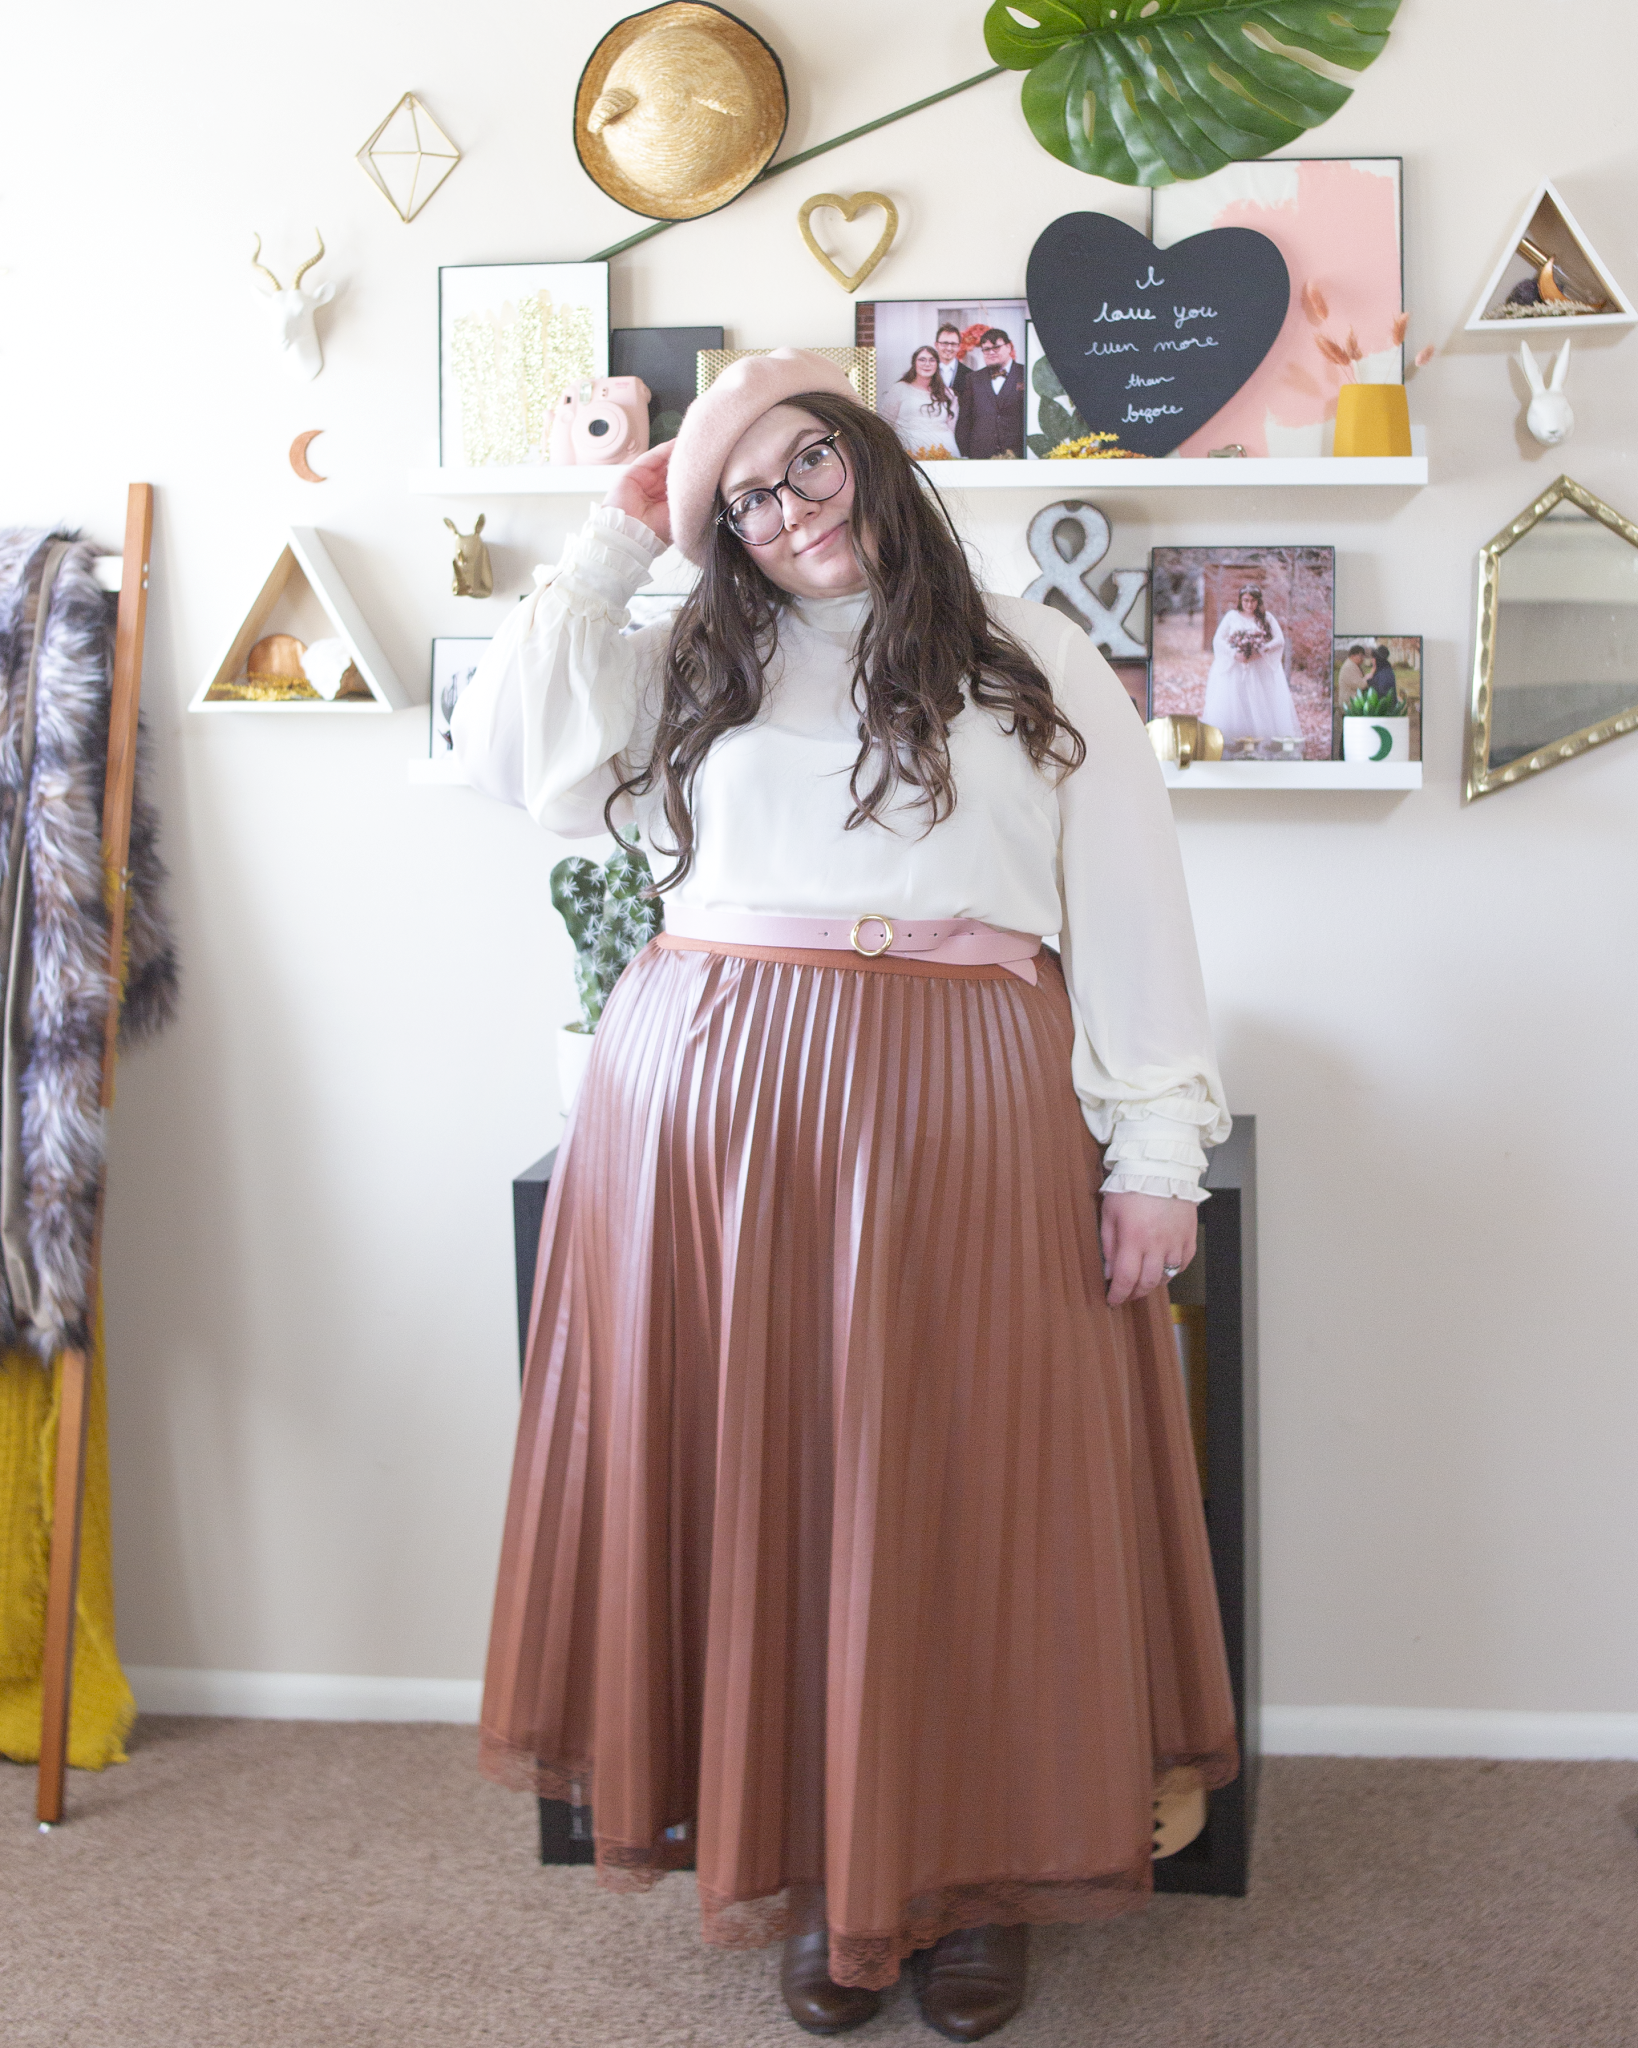 An outfit consisting of a pastel pink beret, a white high mockneck blouse with long puffy sleeves with ruffles at the sleeve hems, tucked into a cognac brown pleated midi skirt with a lace hemline, and brown chelsea boot.